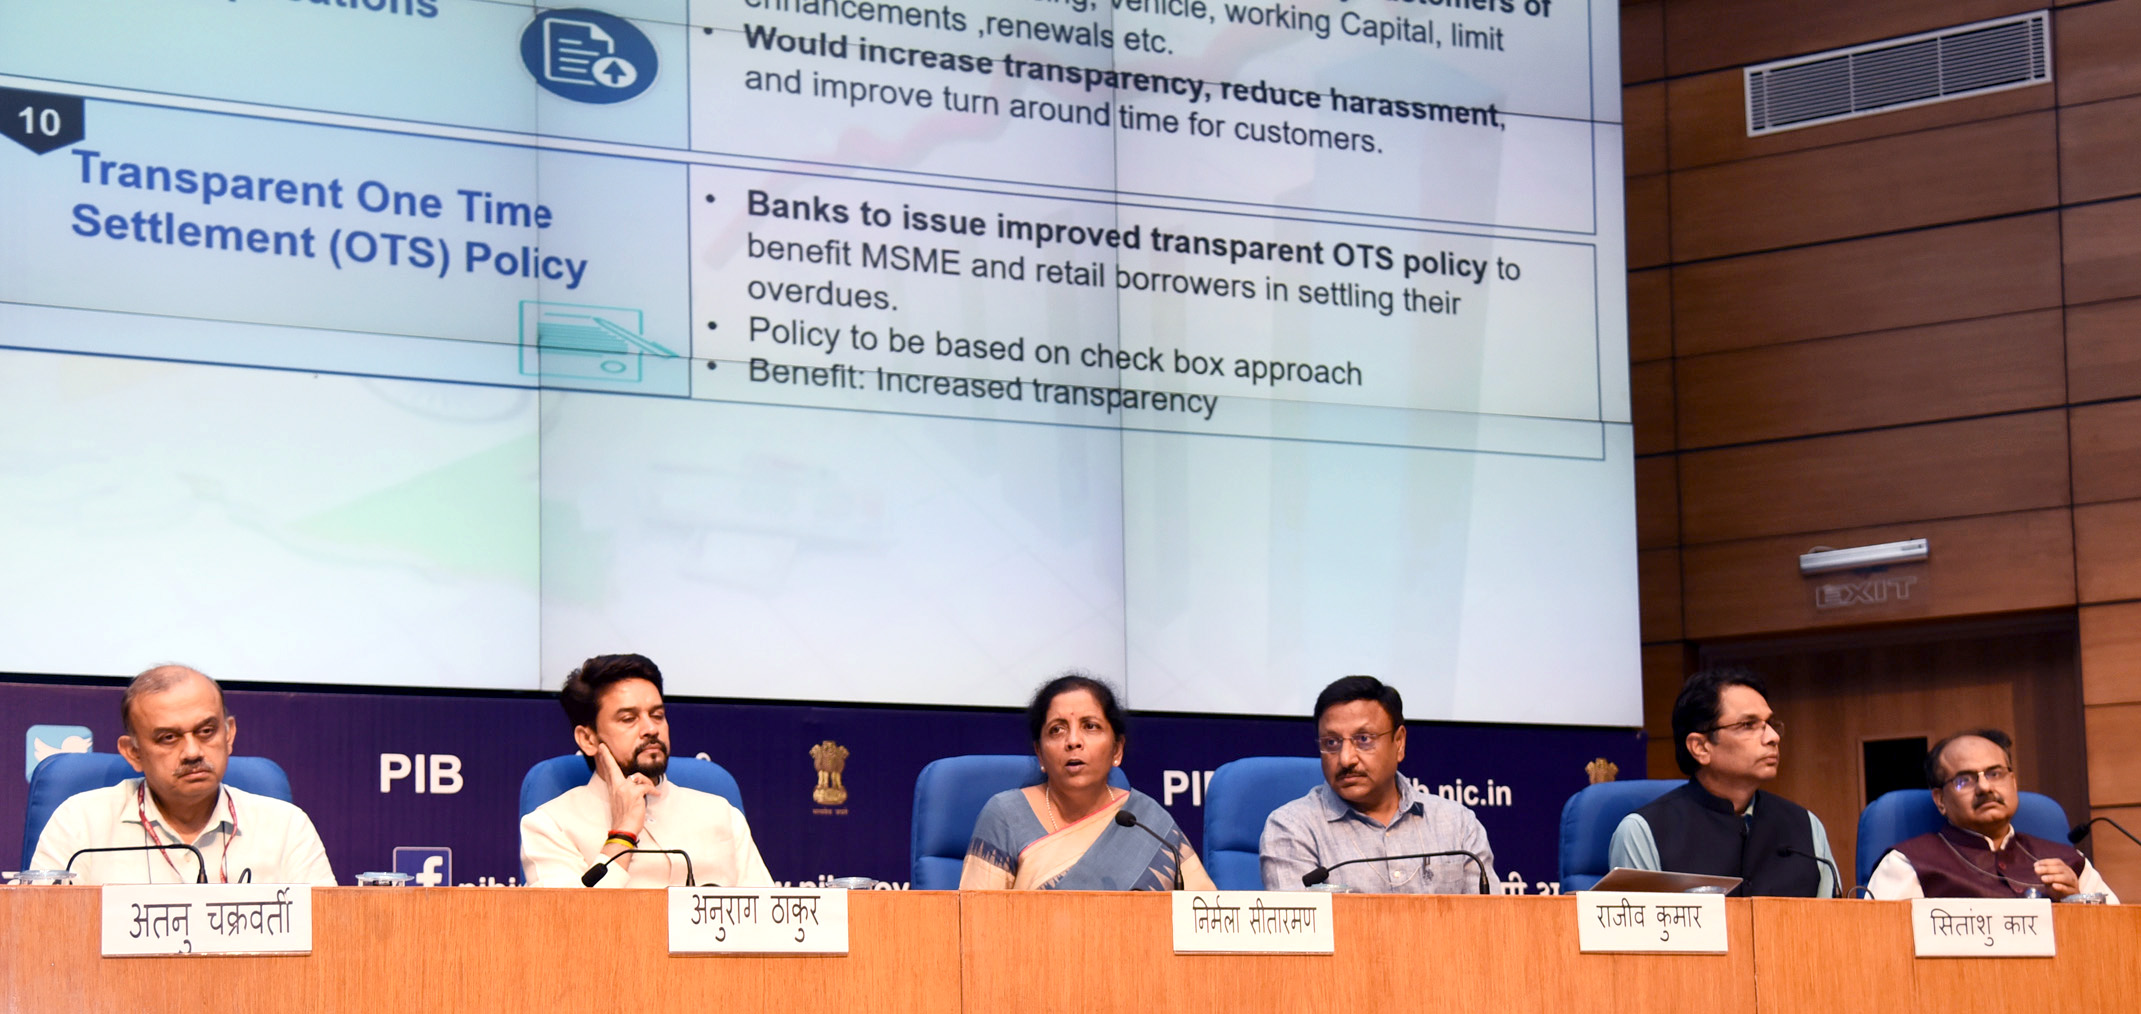 The Union Minister for Finance and Corporate Affairs, Smt. Nirmala Sitharaman addressing a press conference, in New Delhi on August 23, 2019. The Minister of State for Finance and Corporate Affairs, Shri Anurag Singh Thakur, the Secretary, Department of Financial Services, Shri Rajiv Kumar, the Principal Director General (M&C), Press Information Bureau, Shri Sitanshu R. Kar and other dignitaries are also seen.